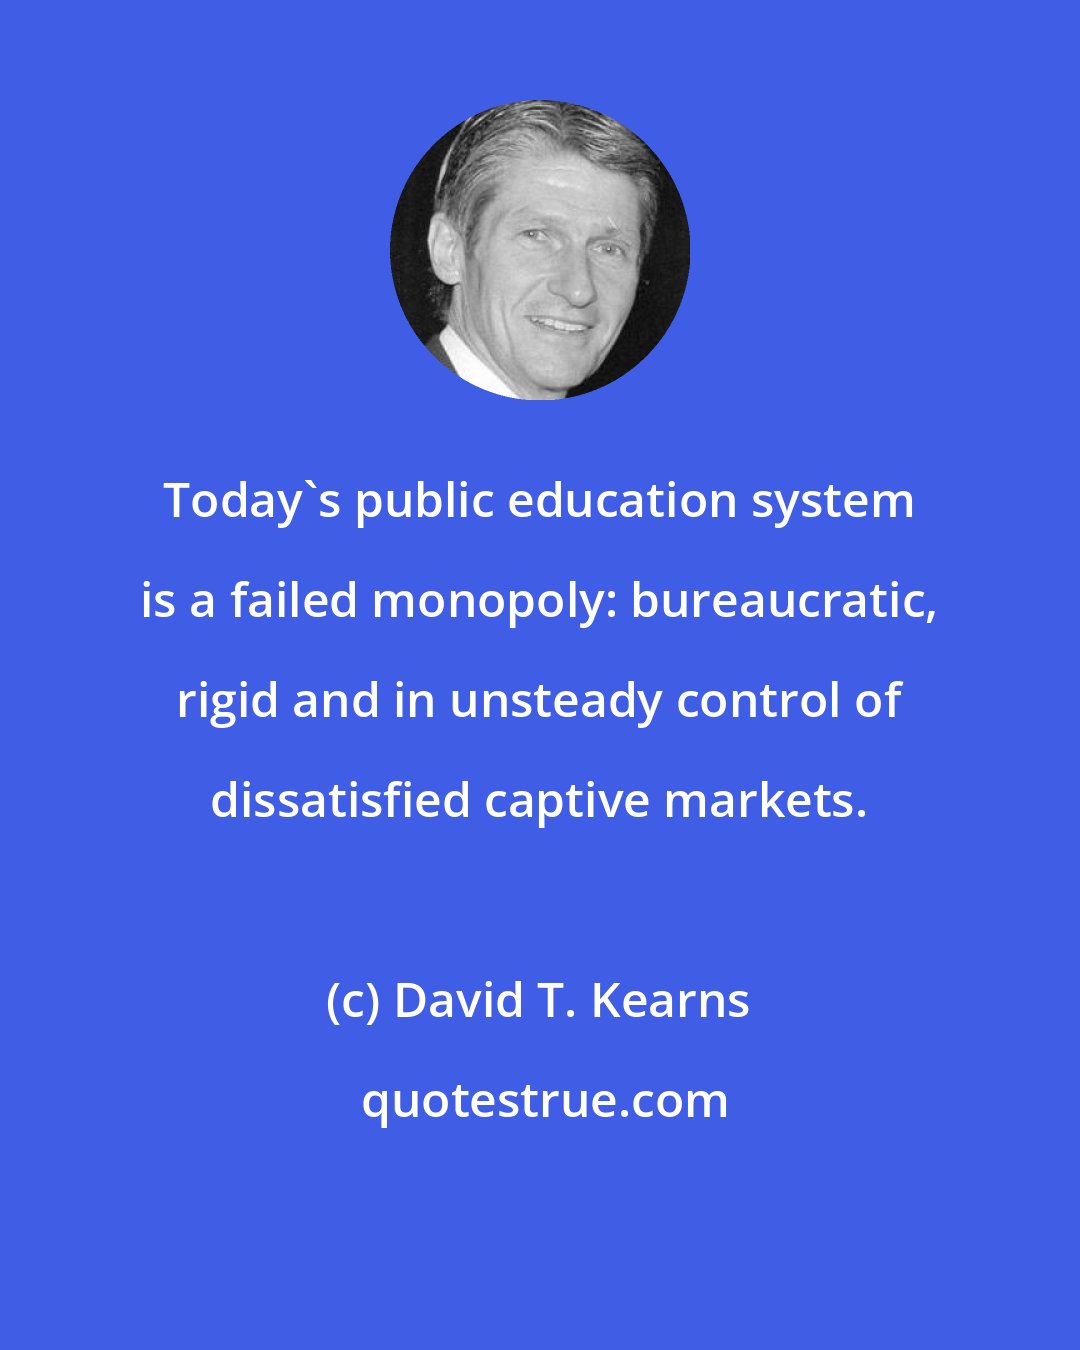 David T. Kearns: Today's public education system is a failed monopoly: bureaucratic, rigid and in unsteady control of dissatisfied captive markets.